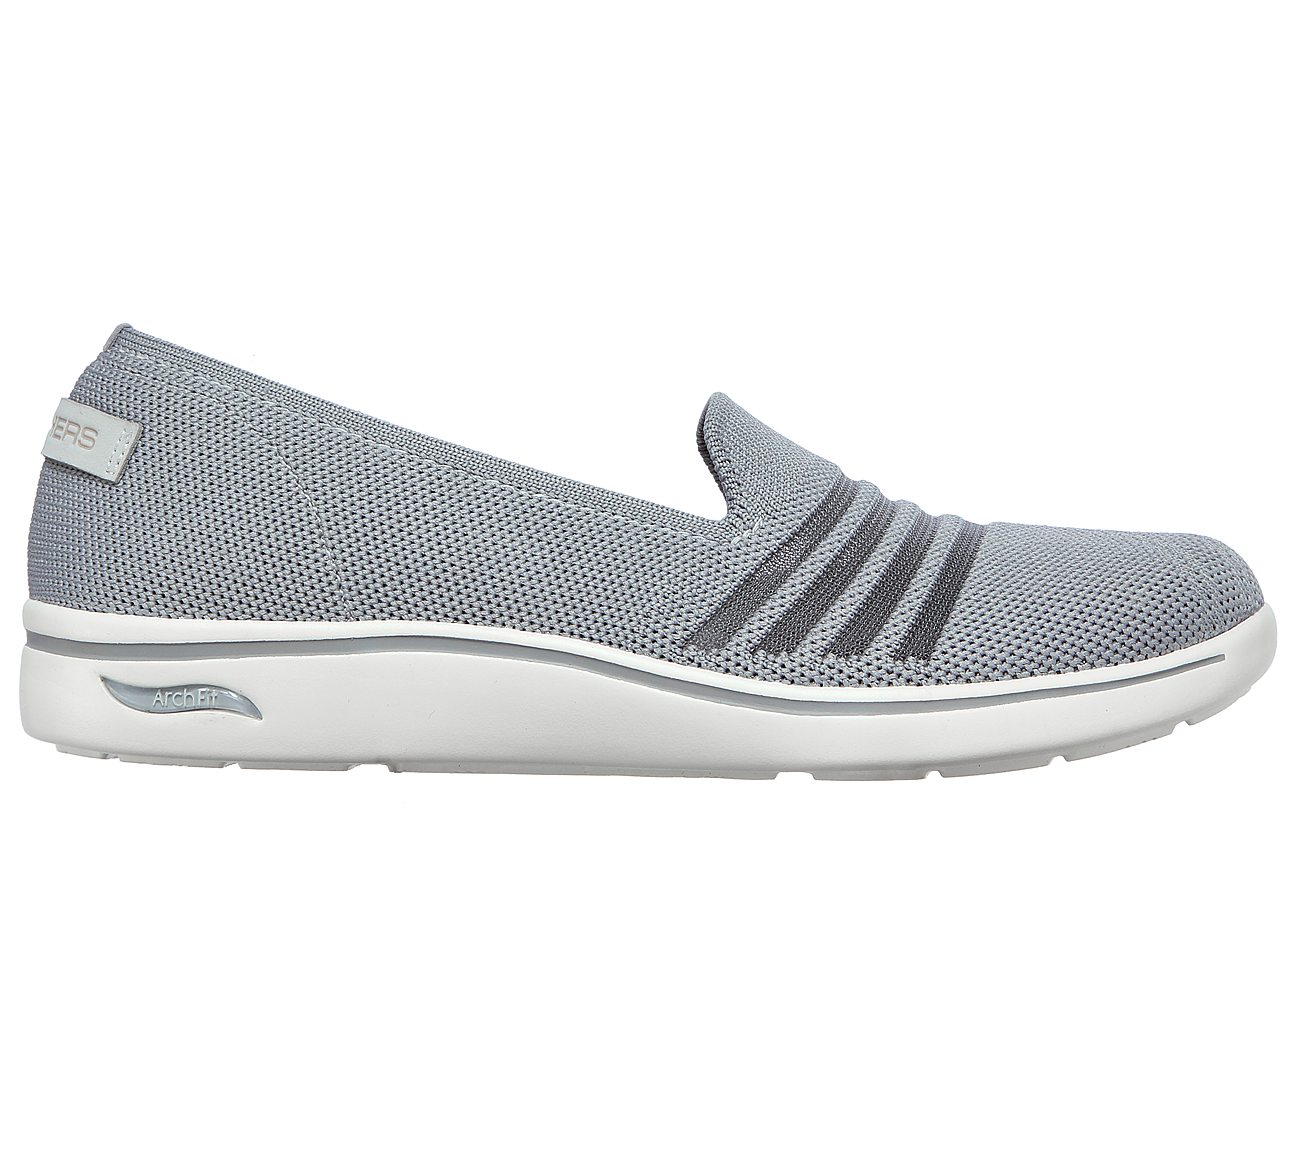 ARCH FIT UPLIFT-CUTTING EDGE, GREY Footwear Lateral View